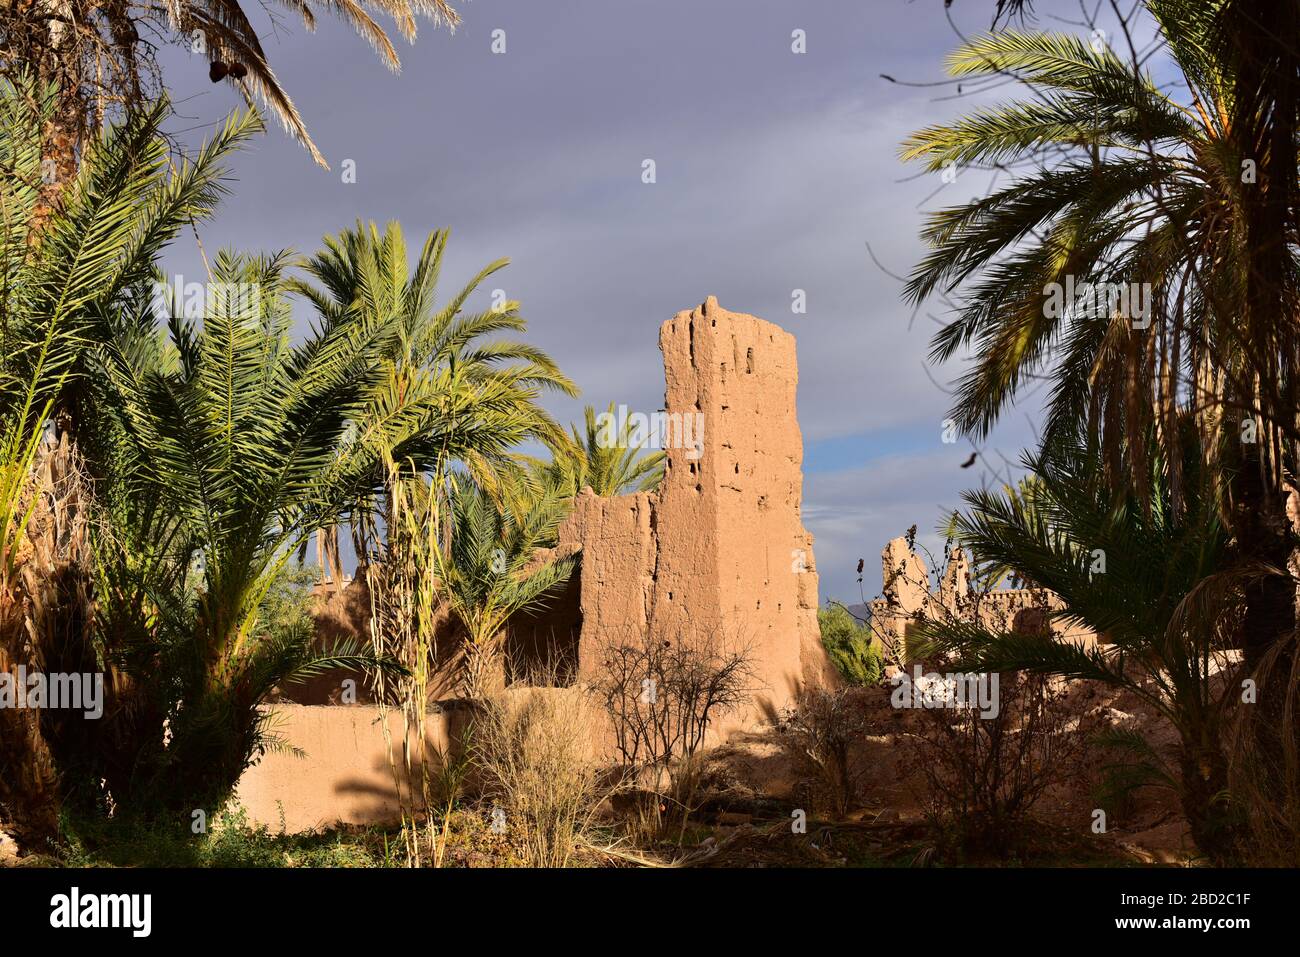 Old Kasbah surrounded by palms in Skoura oasis, Morocco Stock Photo